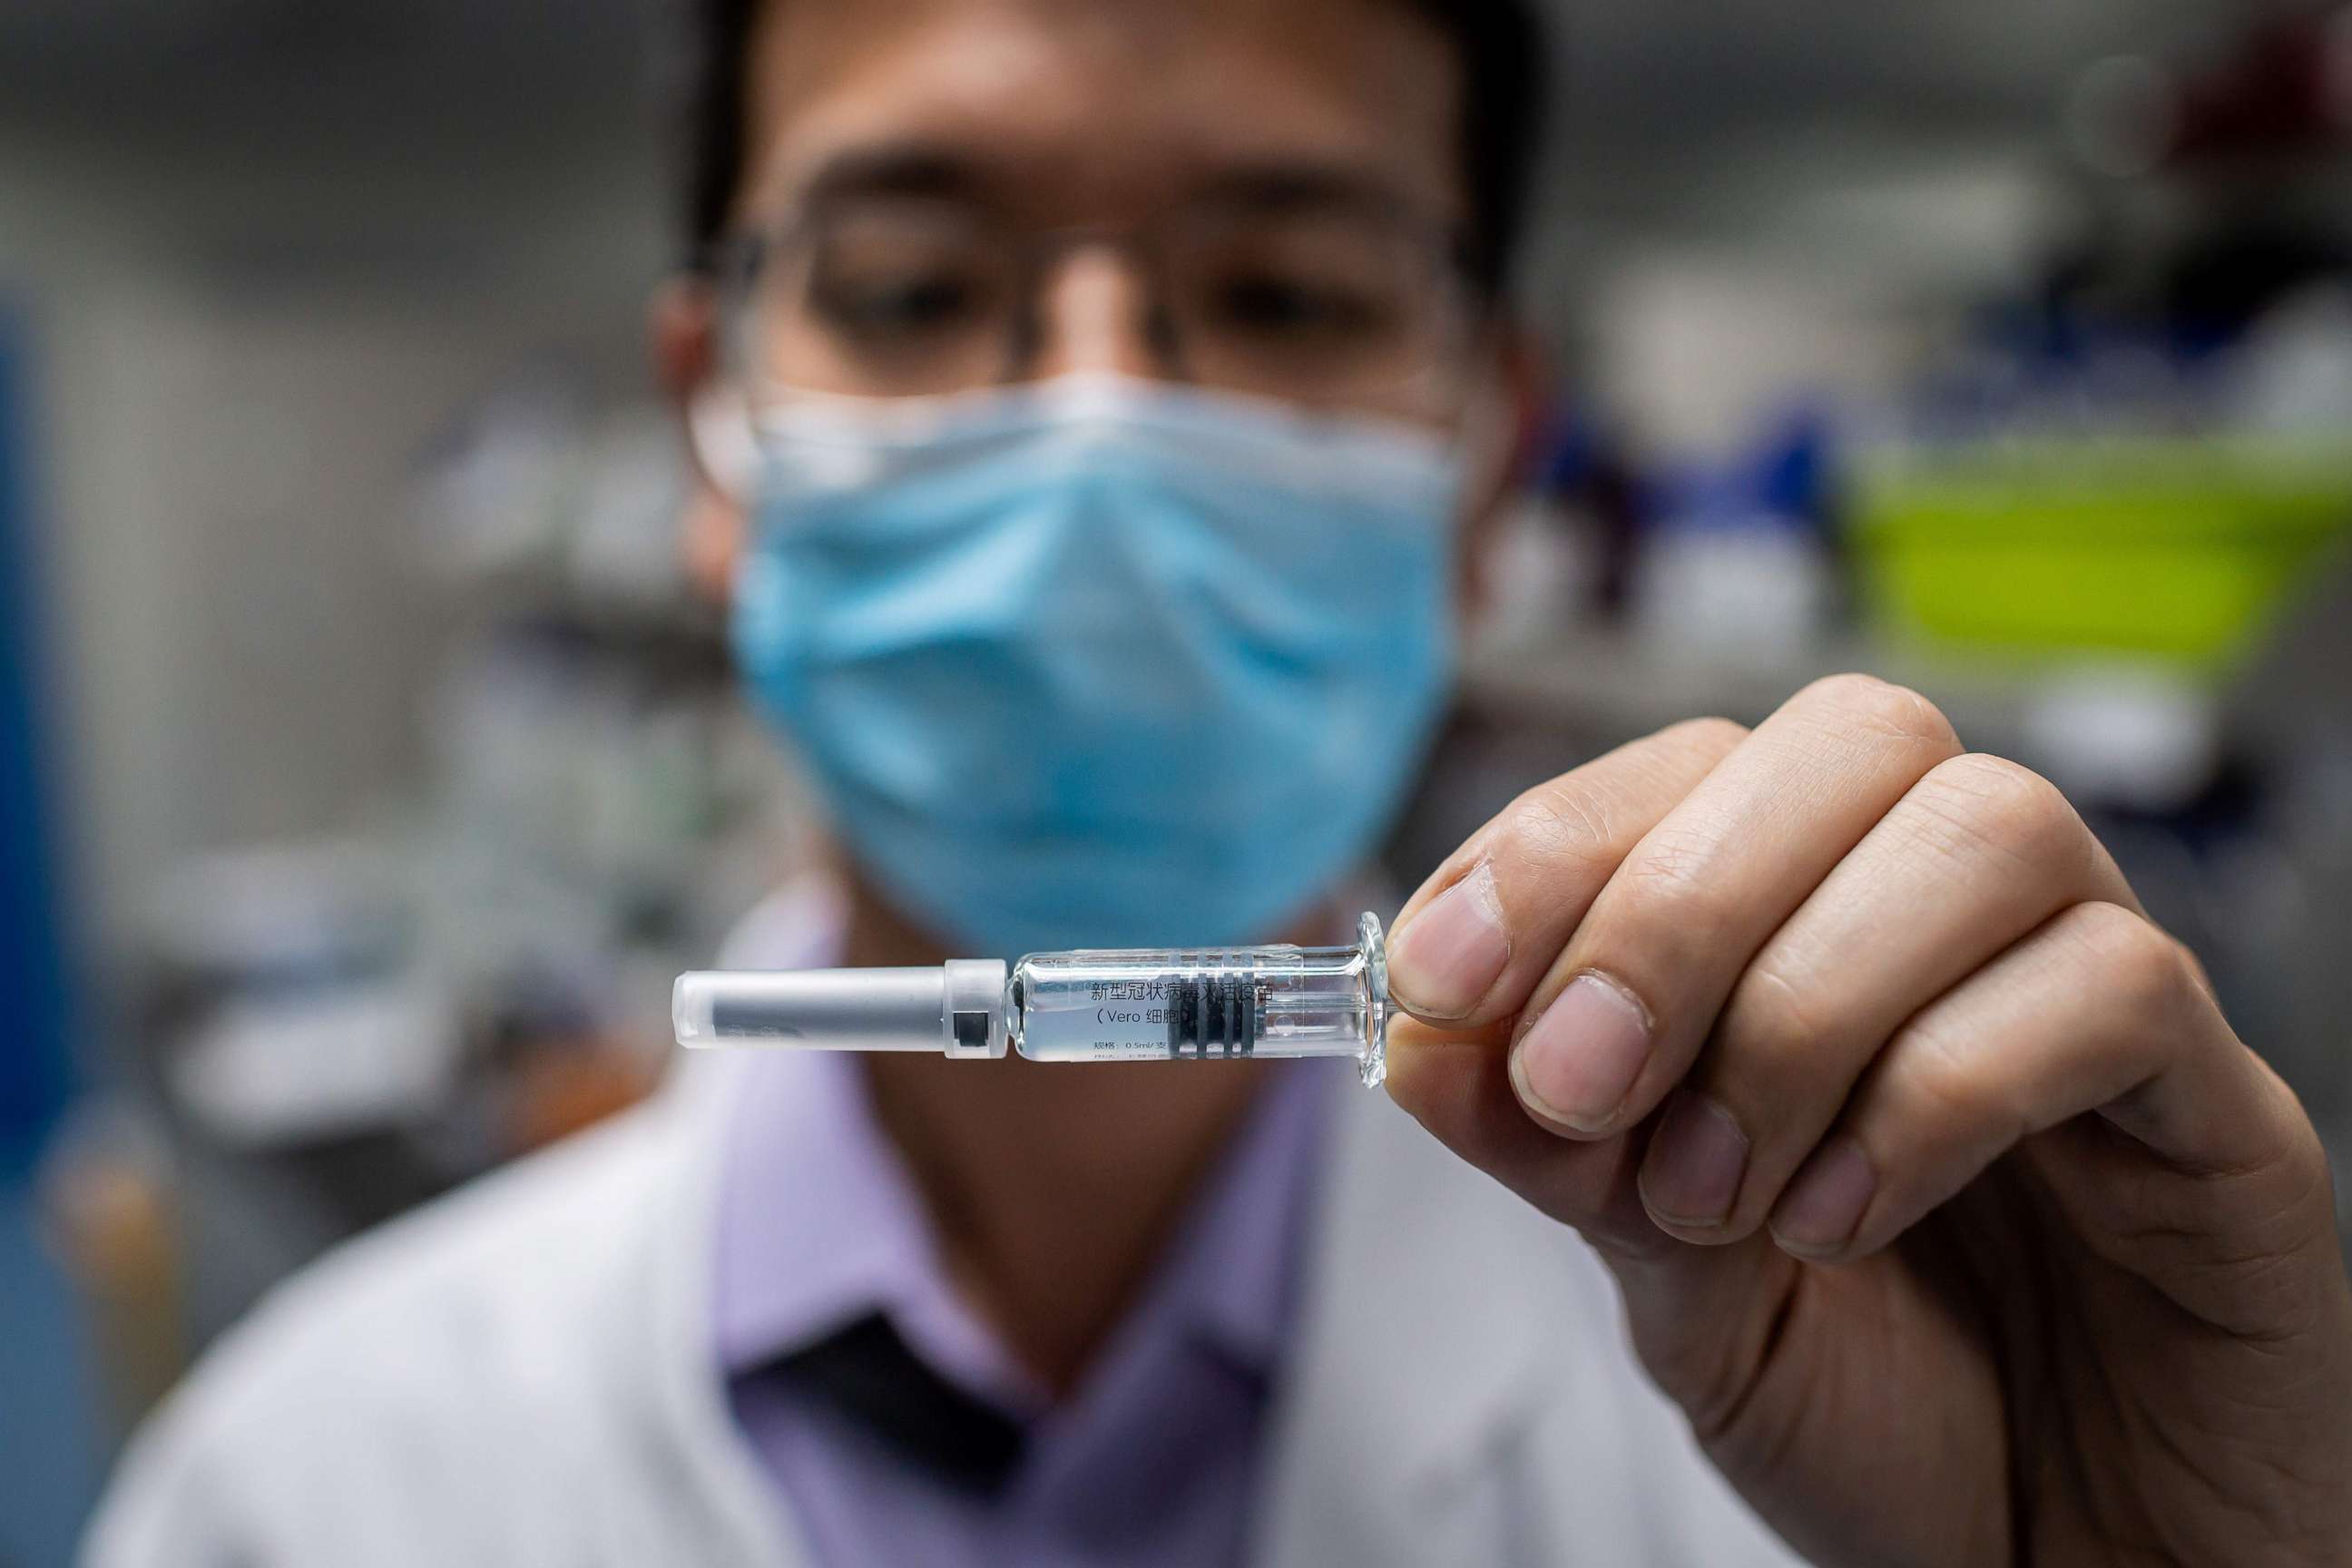 PHOTO: An engineer displays an experimental vaccine for the COVID-19 coronavirus that was tested at the Quality Control Laboratory at the Sinovac Biotech facilities in Beijing, April 29, 2020.